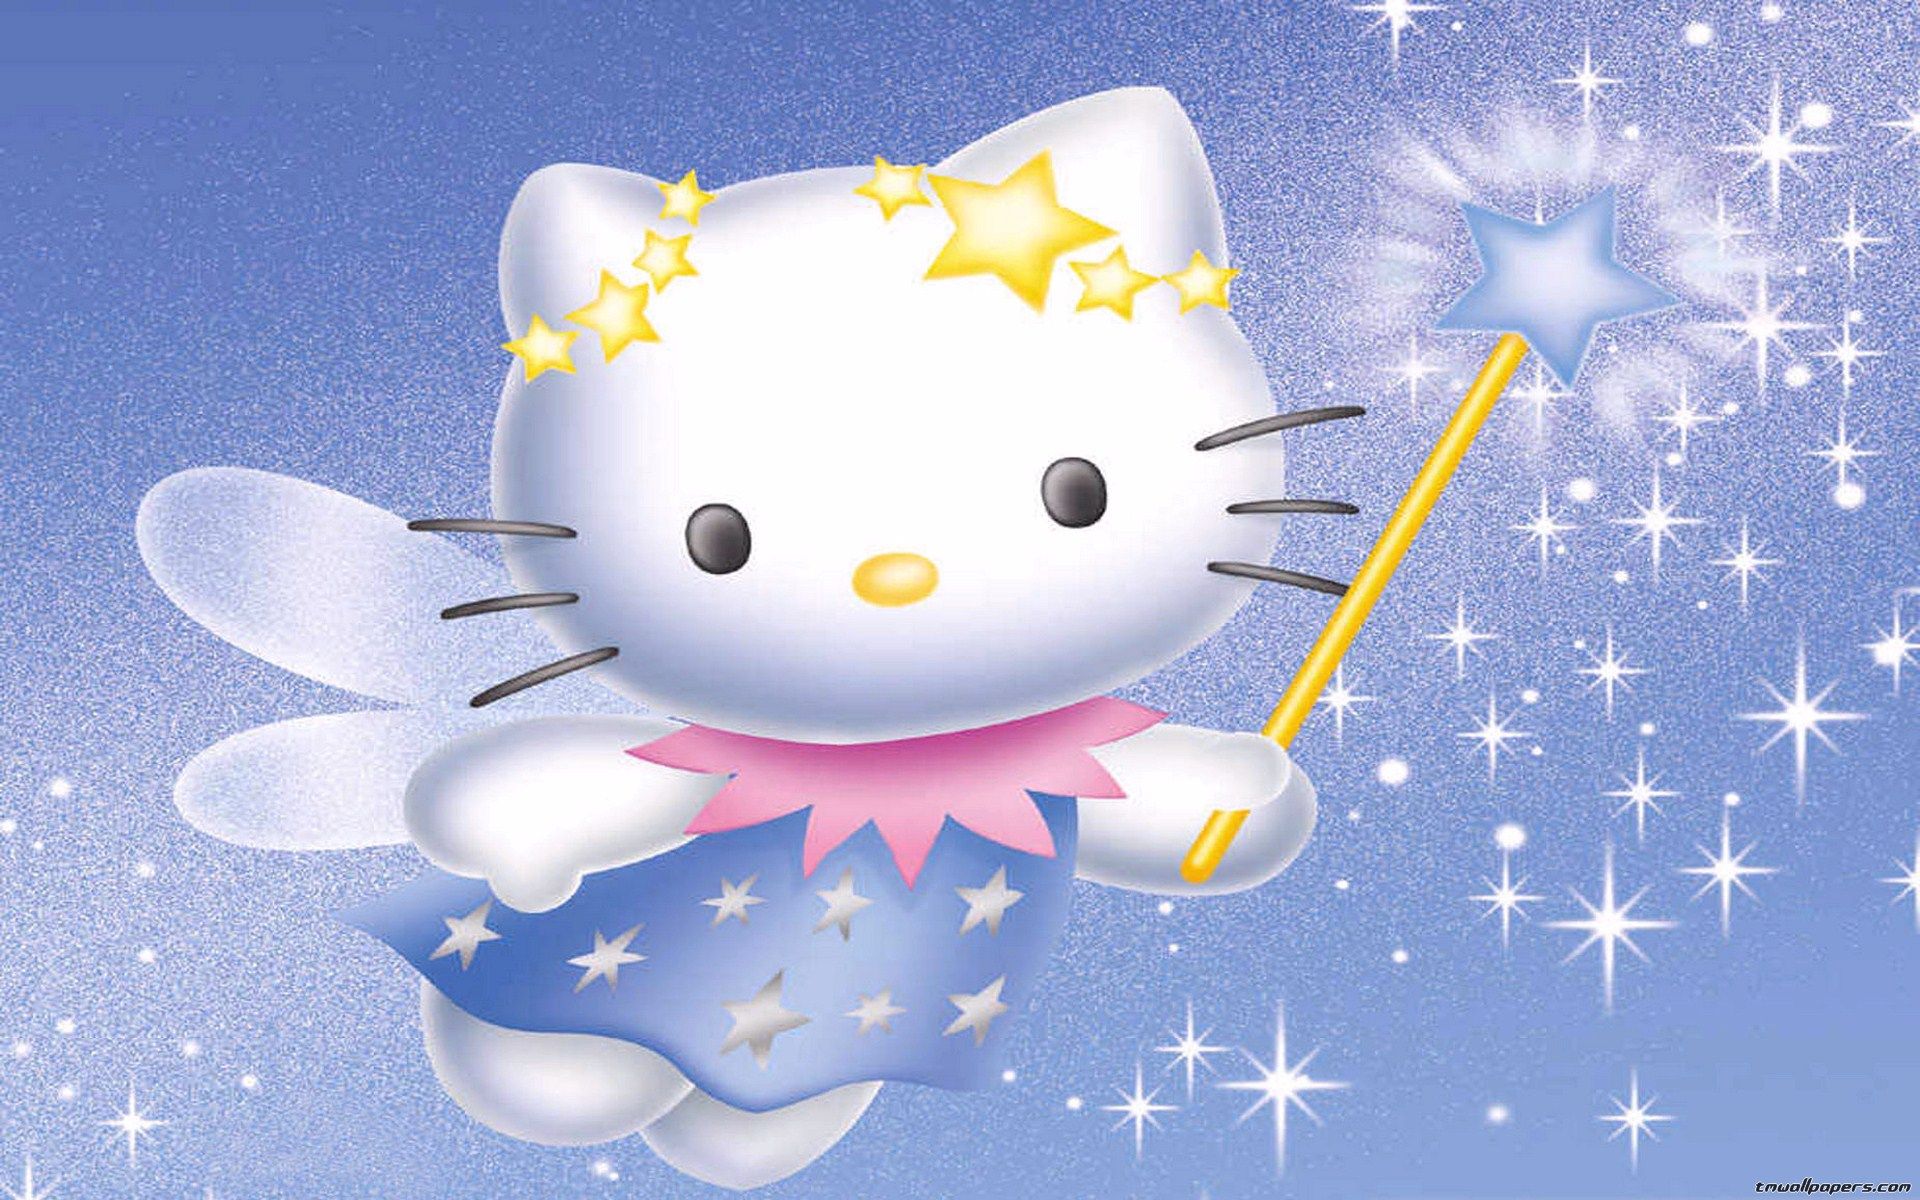 TM.Wallpapers Wide wallpapers e HD wallpapers - Hello Kitty wallpapers